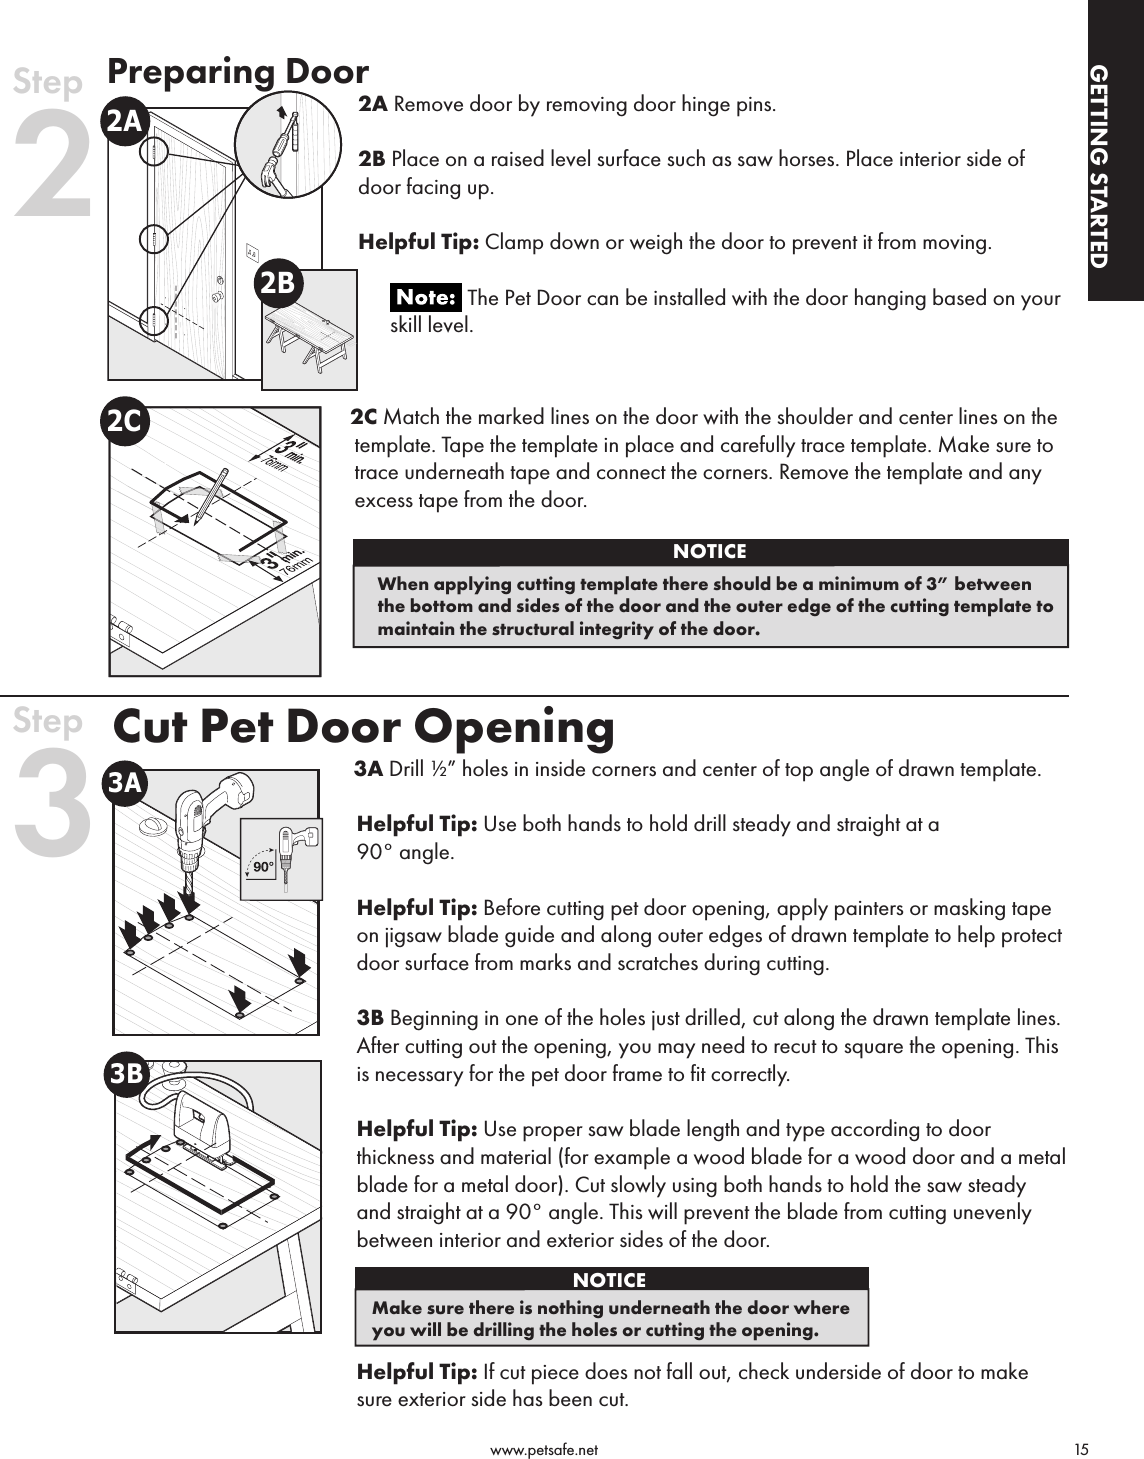                                                                                          www.petsafe.net                                        15GETTING STARTEDGETTING STARTEDNOTICEWhen applying cutting template there should be a minimum of 3” between the bottom and sides of the door and the outer edge of the cutting template to maintain the structural integrity of the door. Preparing Door2A Remove door by removing door hinge pins.  2B Place on a raised level surface such as saw horses. Place interior side of door facing up.Helpful Tip: Clamp down or weigh the door to prevent it from moving.       The Pet Door can be installed with the door hanging based on your       skill level.2C Match the marked lines on the door with the shoulder and center lines on the template. Tape the template in place and carefully trace template. Make sure to trace underneath tape and connect the corners. Remove the template and any excess tape from the door.Cut Pet Door Opening 3A Drill ½” holes in inside corners and center of top angle of drawn template.Helpful Tip: Use both hands to hold drill steady and straight at a 90° angle.Helpful Tip: Before cutting pet door opening, apply painters or masking tape on jigsaw blade guide and along outer edges of drawn template to help protect door surface from marks and scratches during cutting.3B Beginning in one of the holes just drilled, cut along the drawn template lines. After cutting out the opening, you may need to recut to square the opening. This is necessary for the pet door frame to fit correctly. Helpful Tip: Use proper saw blade length and type according to door thickness and material (for example a wood blade for a wood door and a metal blade for a metal door). Cut slowly using both hands to hold the saw steady and straight at a 90° angle. This will prevent the blade from cutting unevenly between interior and exterior sides of the door.Helpful Tip: If cut piece does not fall out, check underside of door to make sure exterior side has been cut.2A2BStep 22C3A3BStep 3NOTICEMake sure there is nothing underneath the door where you will be drilling the holes or cutting the opening.